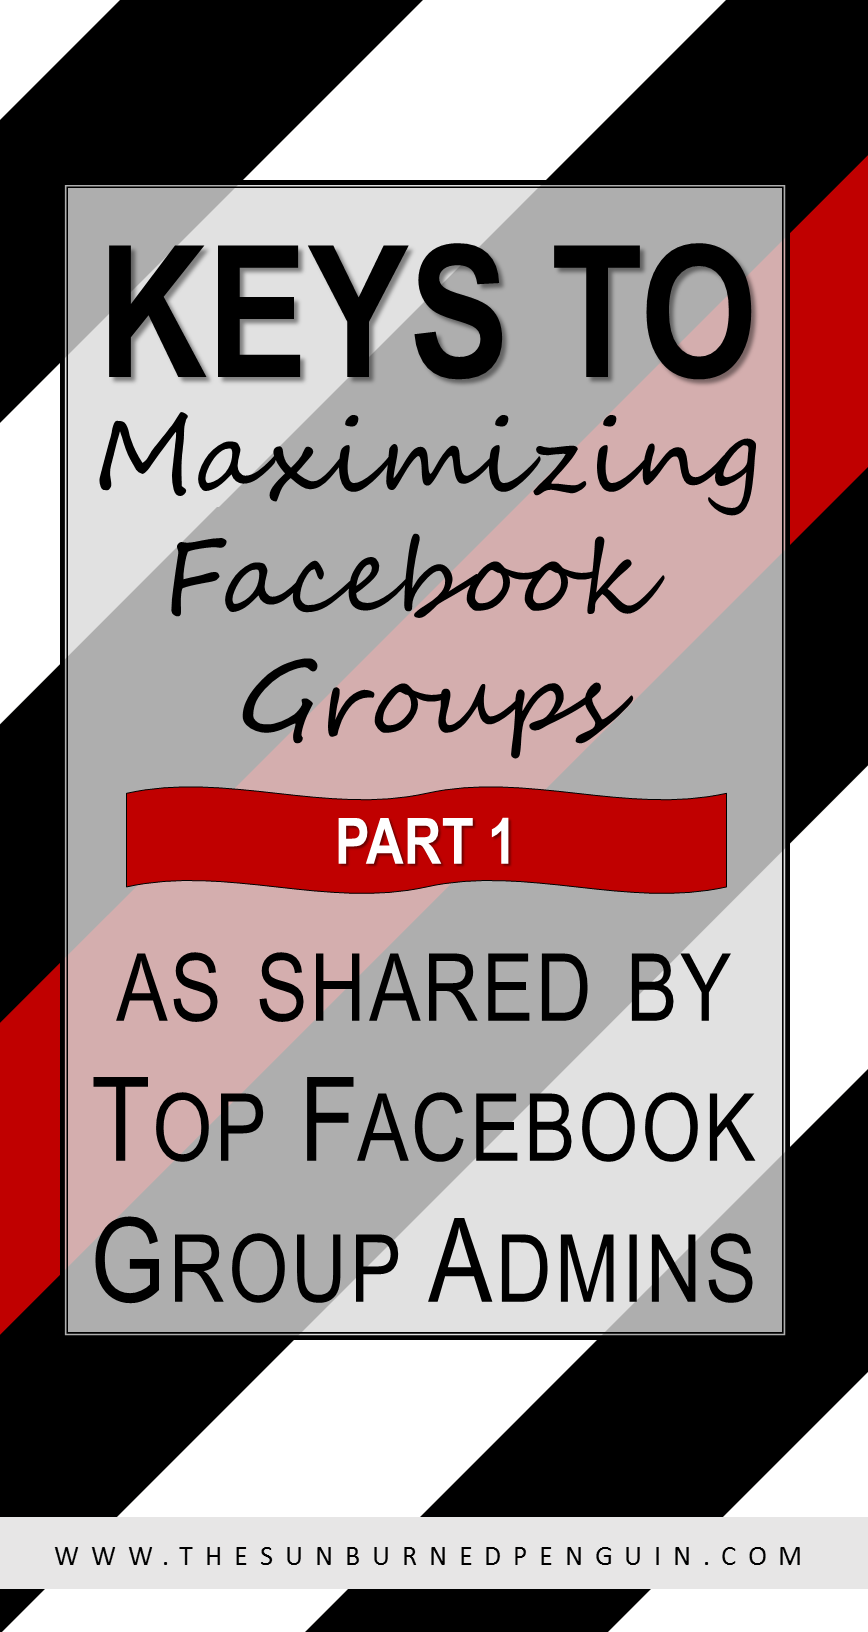 Promo Days: Keys to Maximizing Facebook Groups (as shared by Top Facebook Group Admins) - Part One